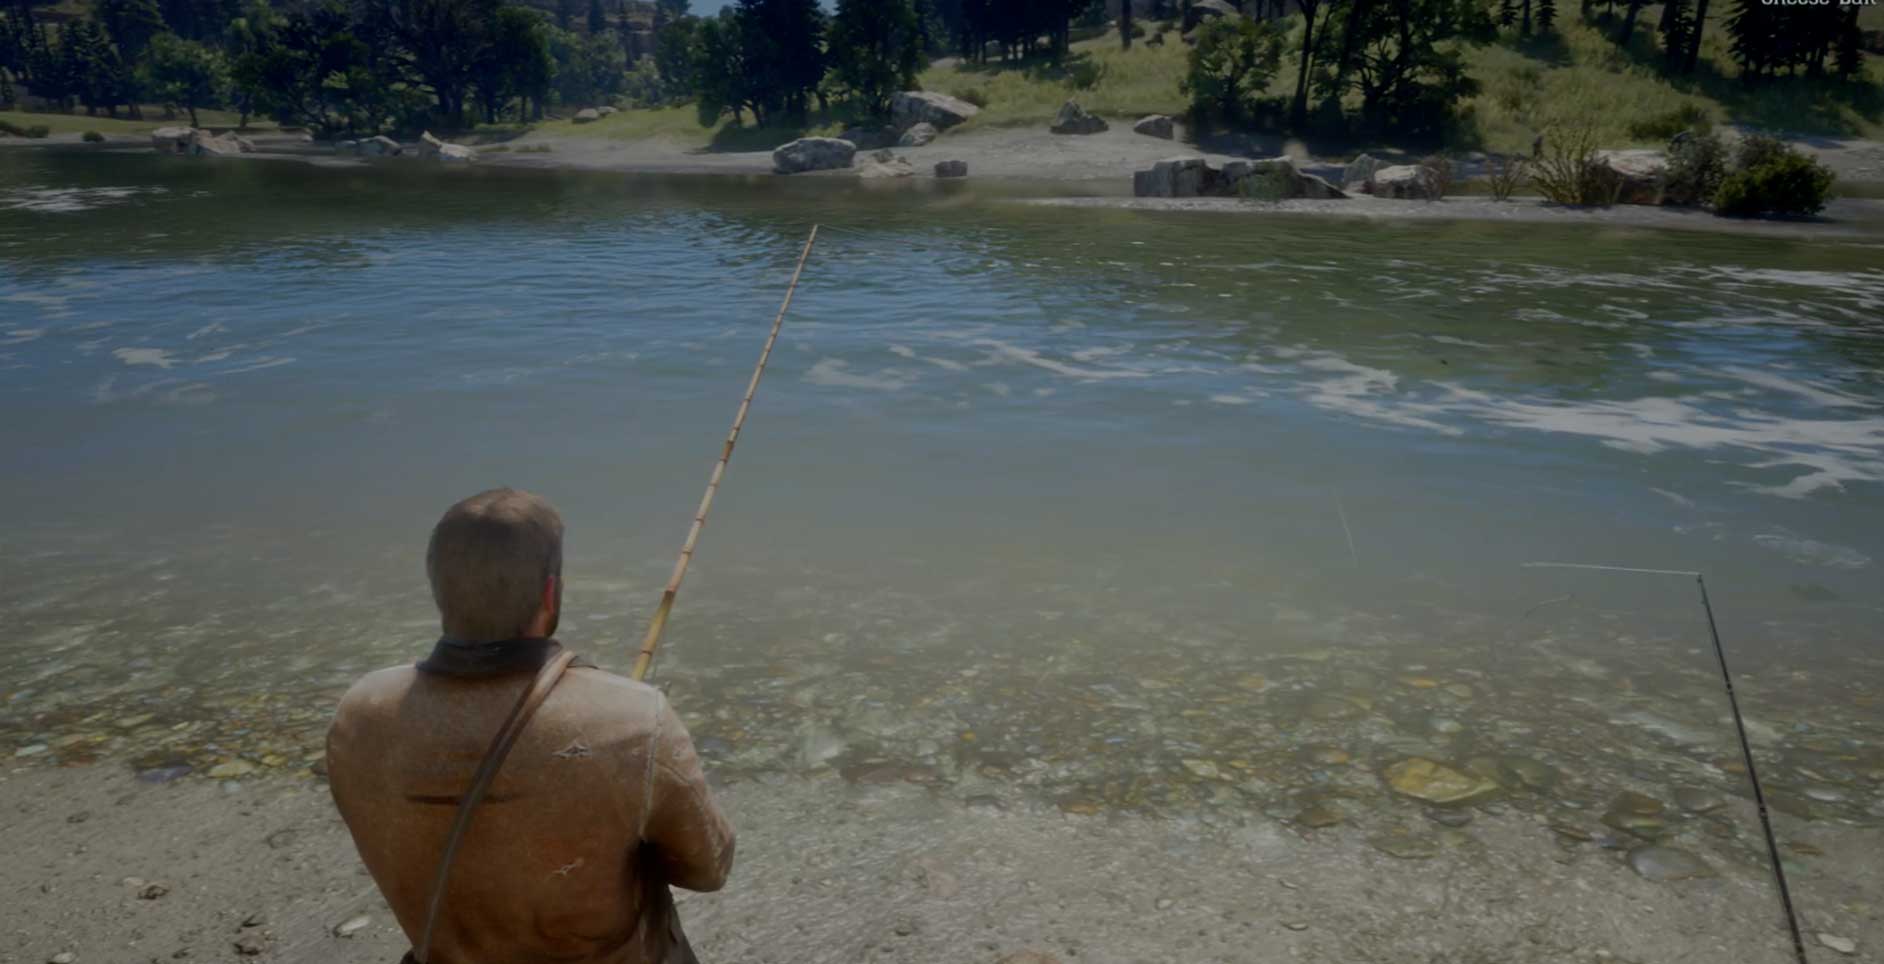 How To Get The Fishing Rod In Red Dead Redemption 2